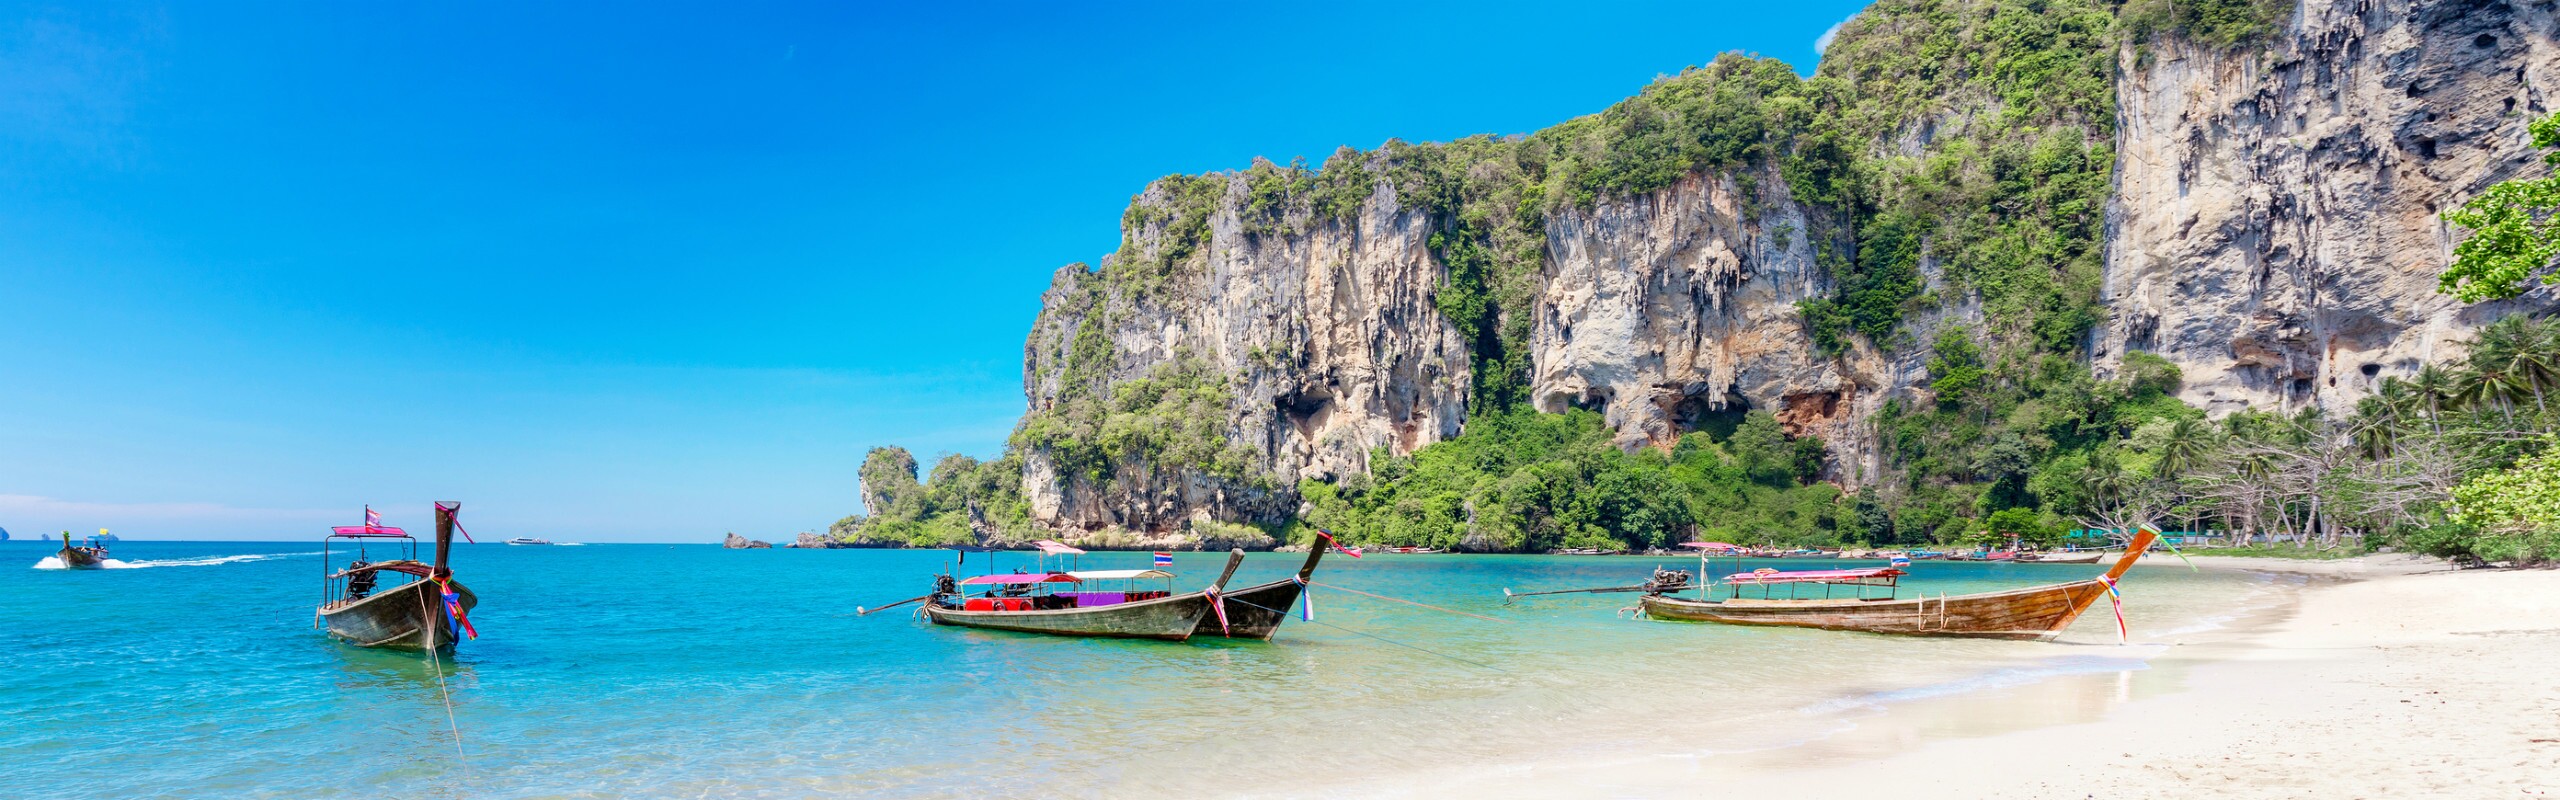 How to Plan a 1 to 2 Week Trip to Thailand